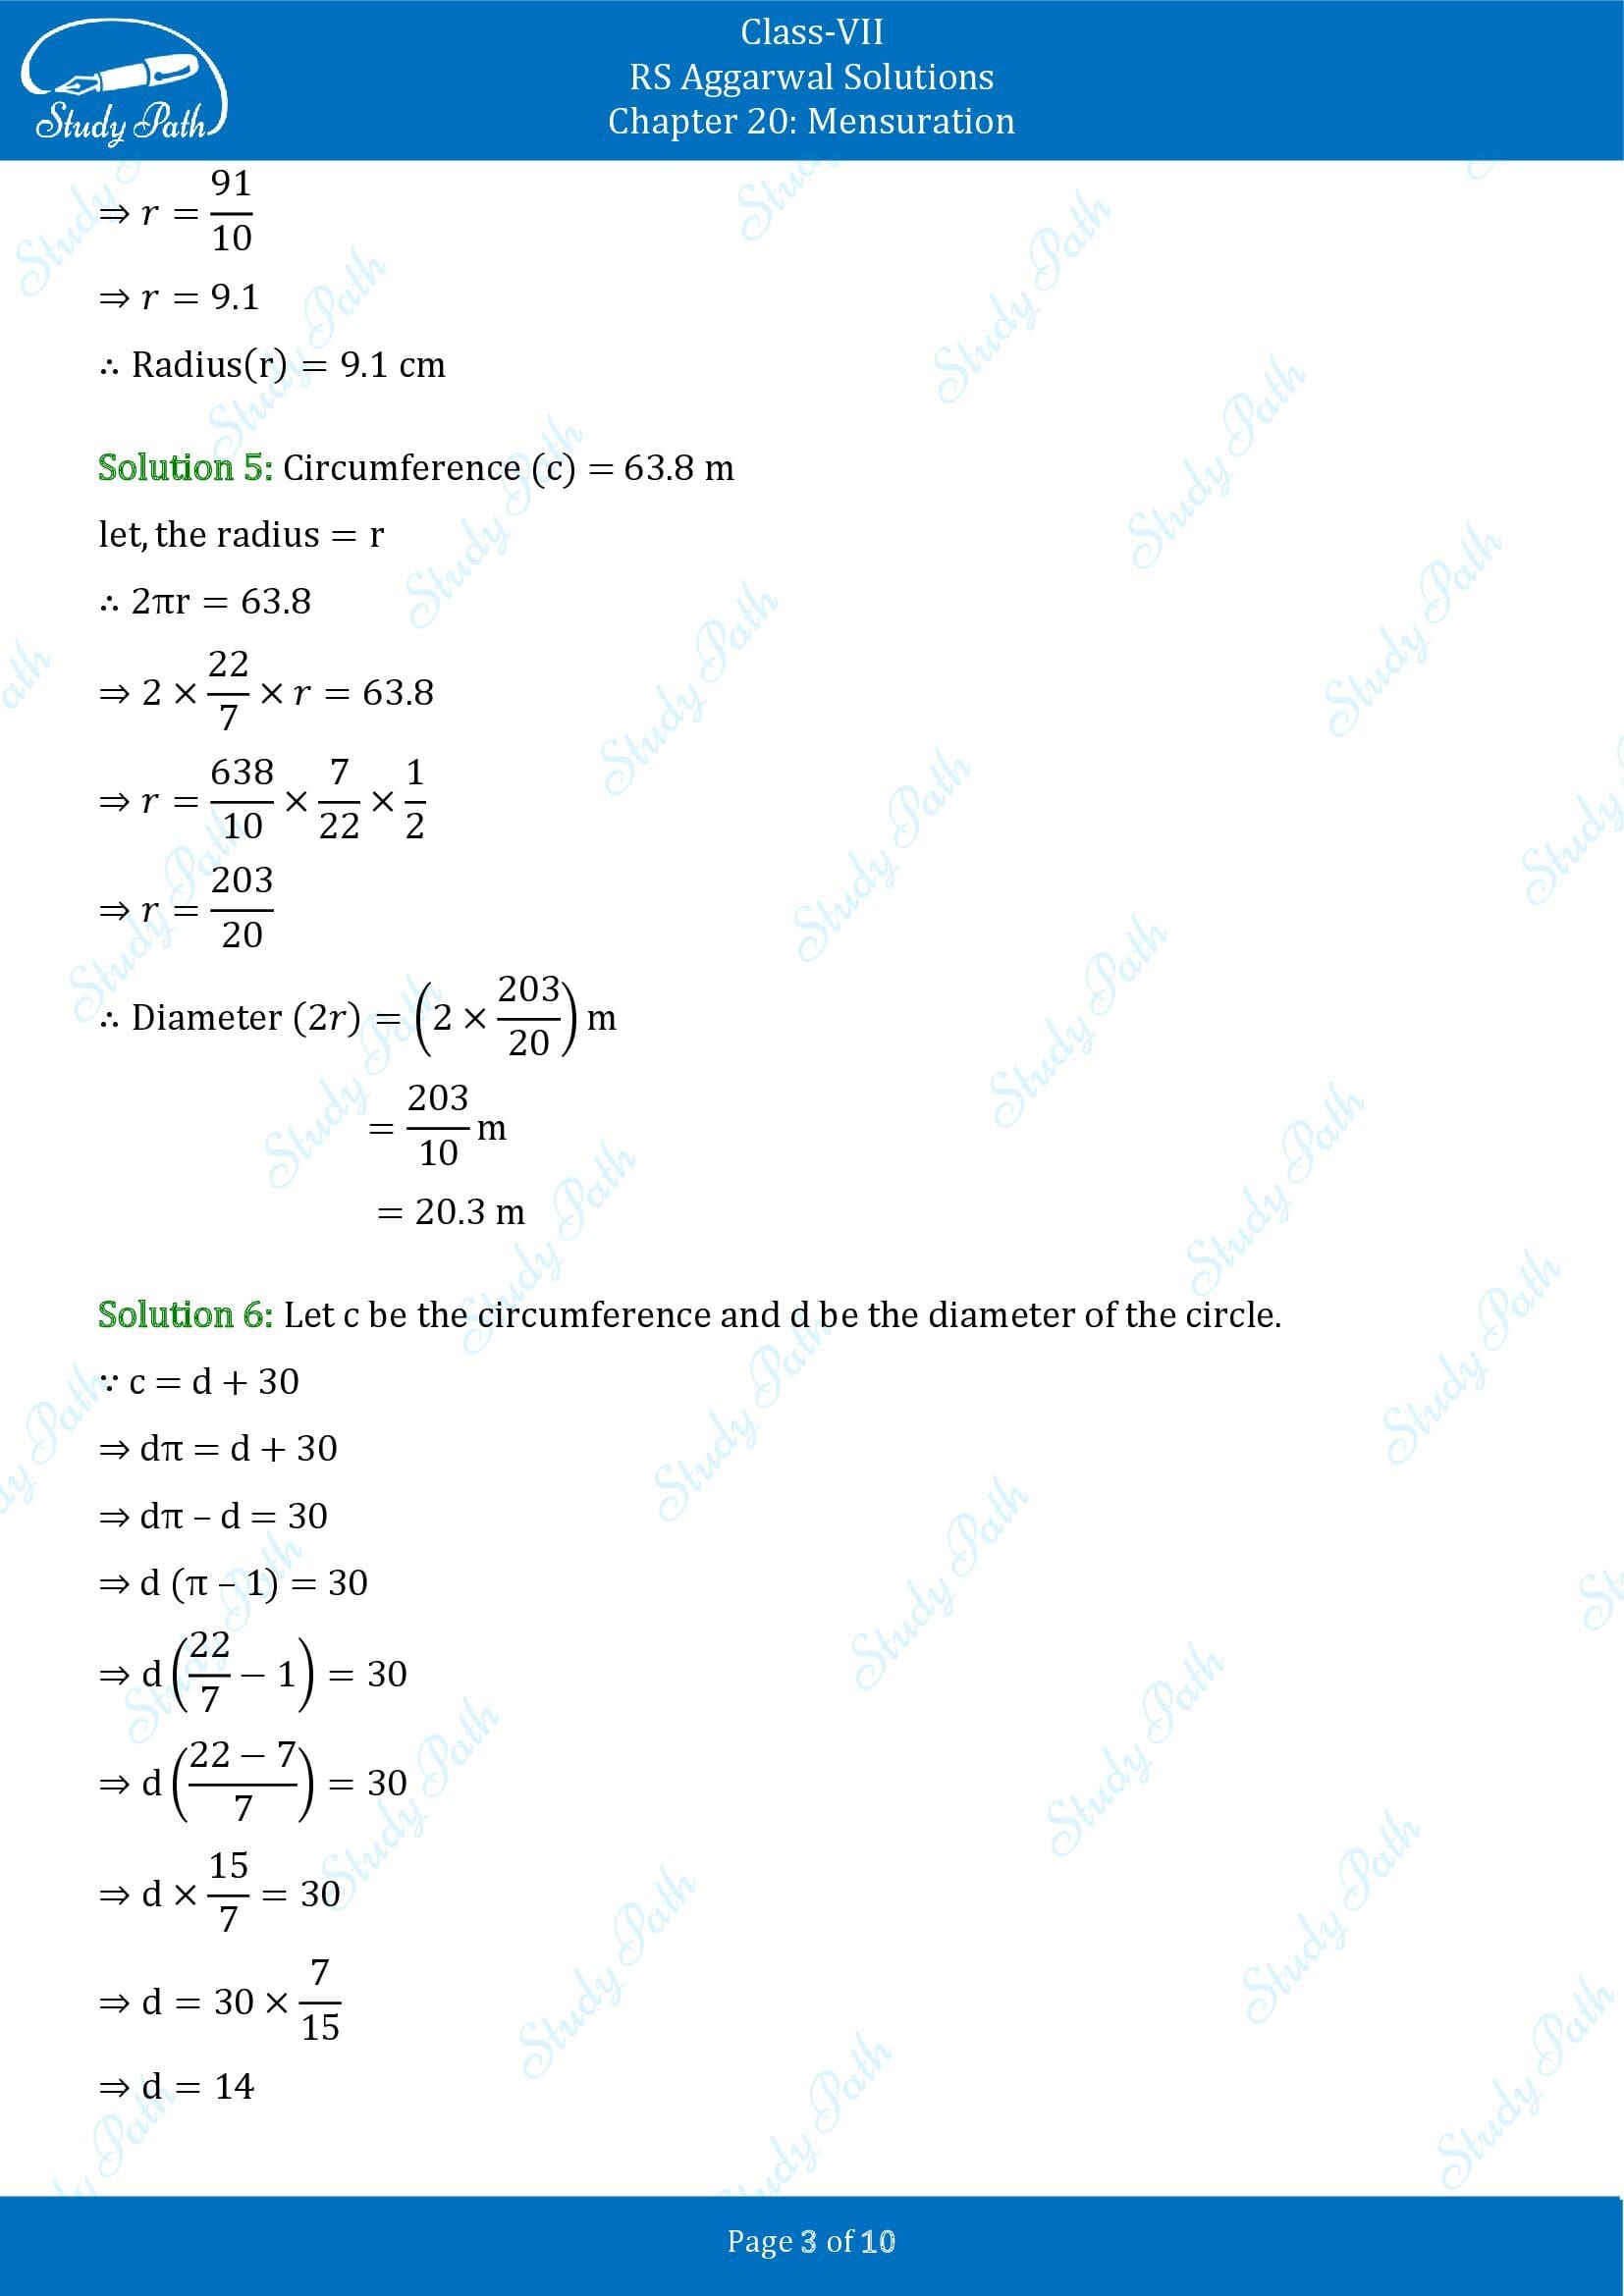 RS Aggarwal Solutions Class 7 Chapter 20 Mensuration Exercise 20E 00003